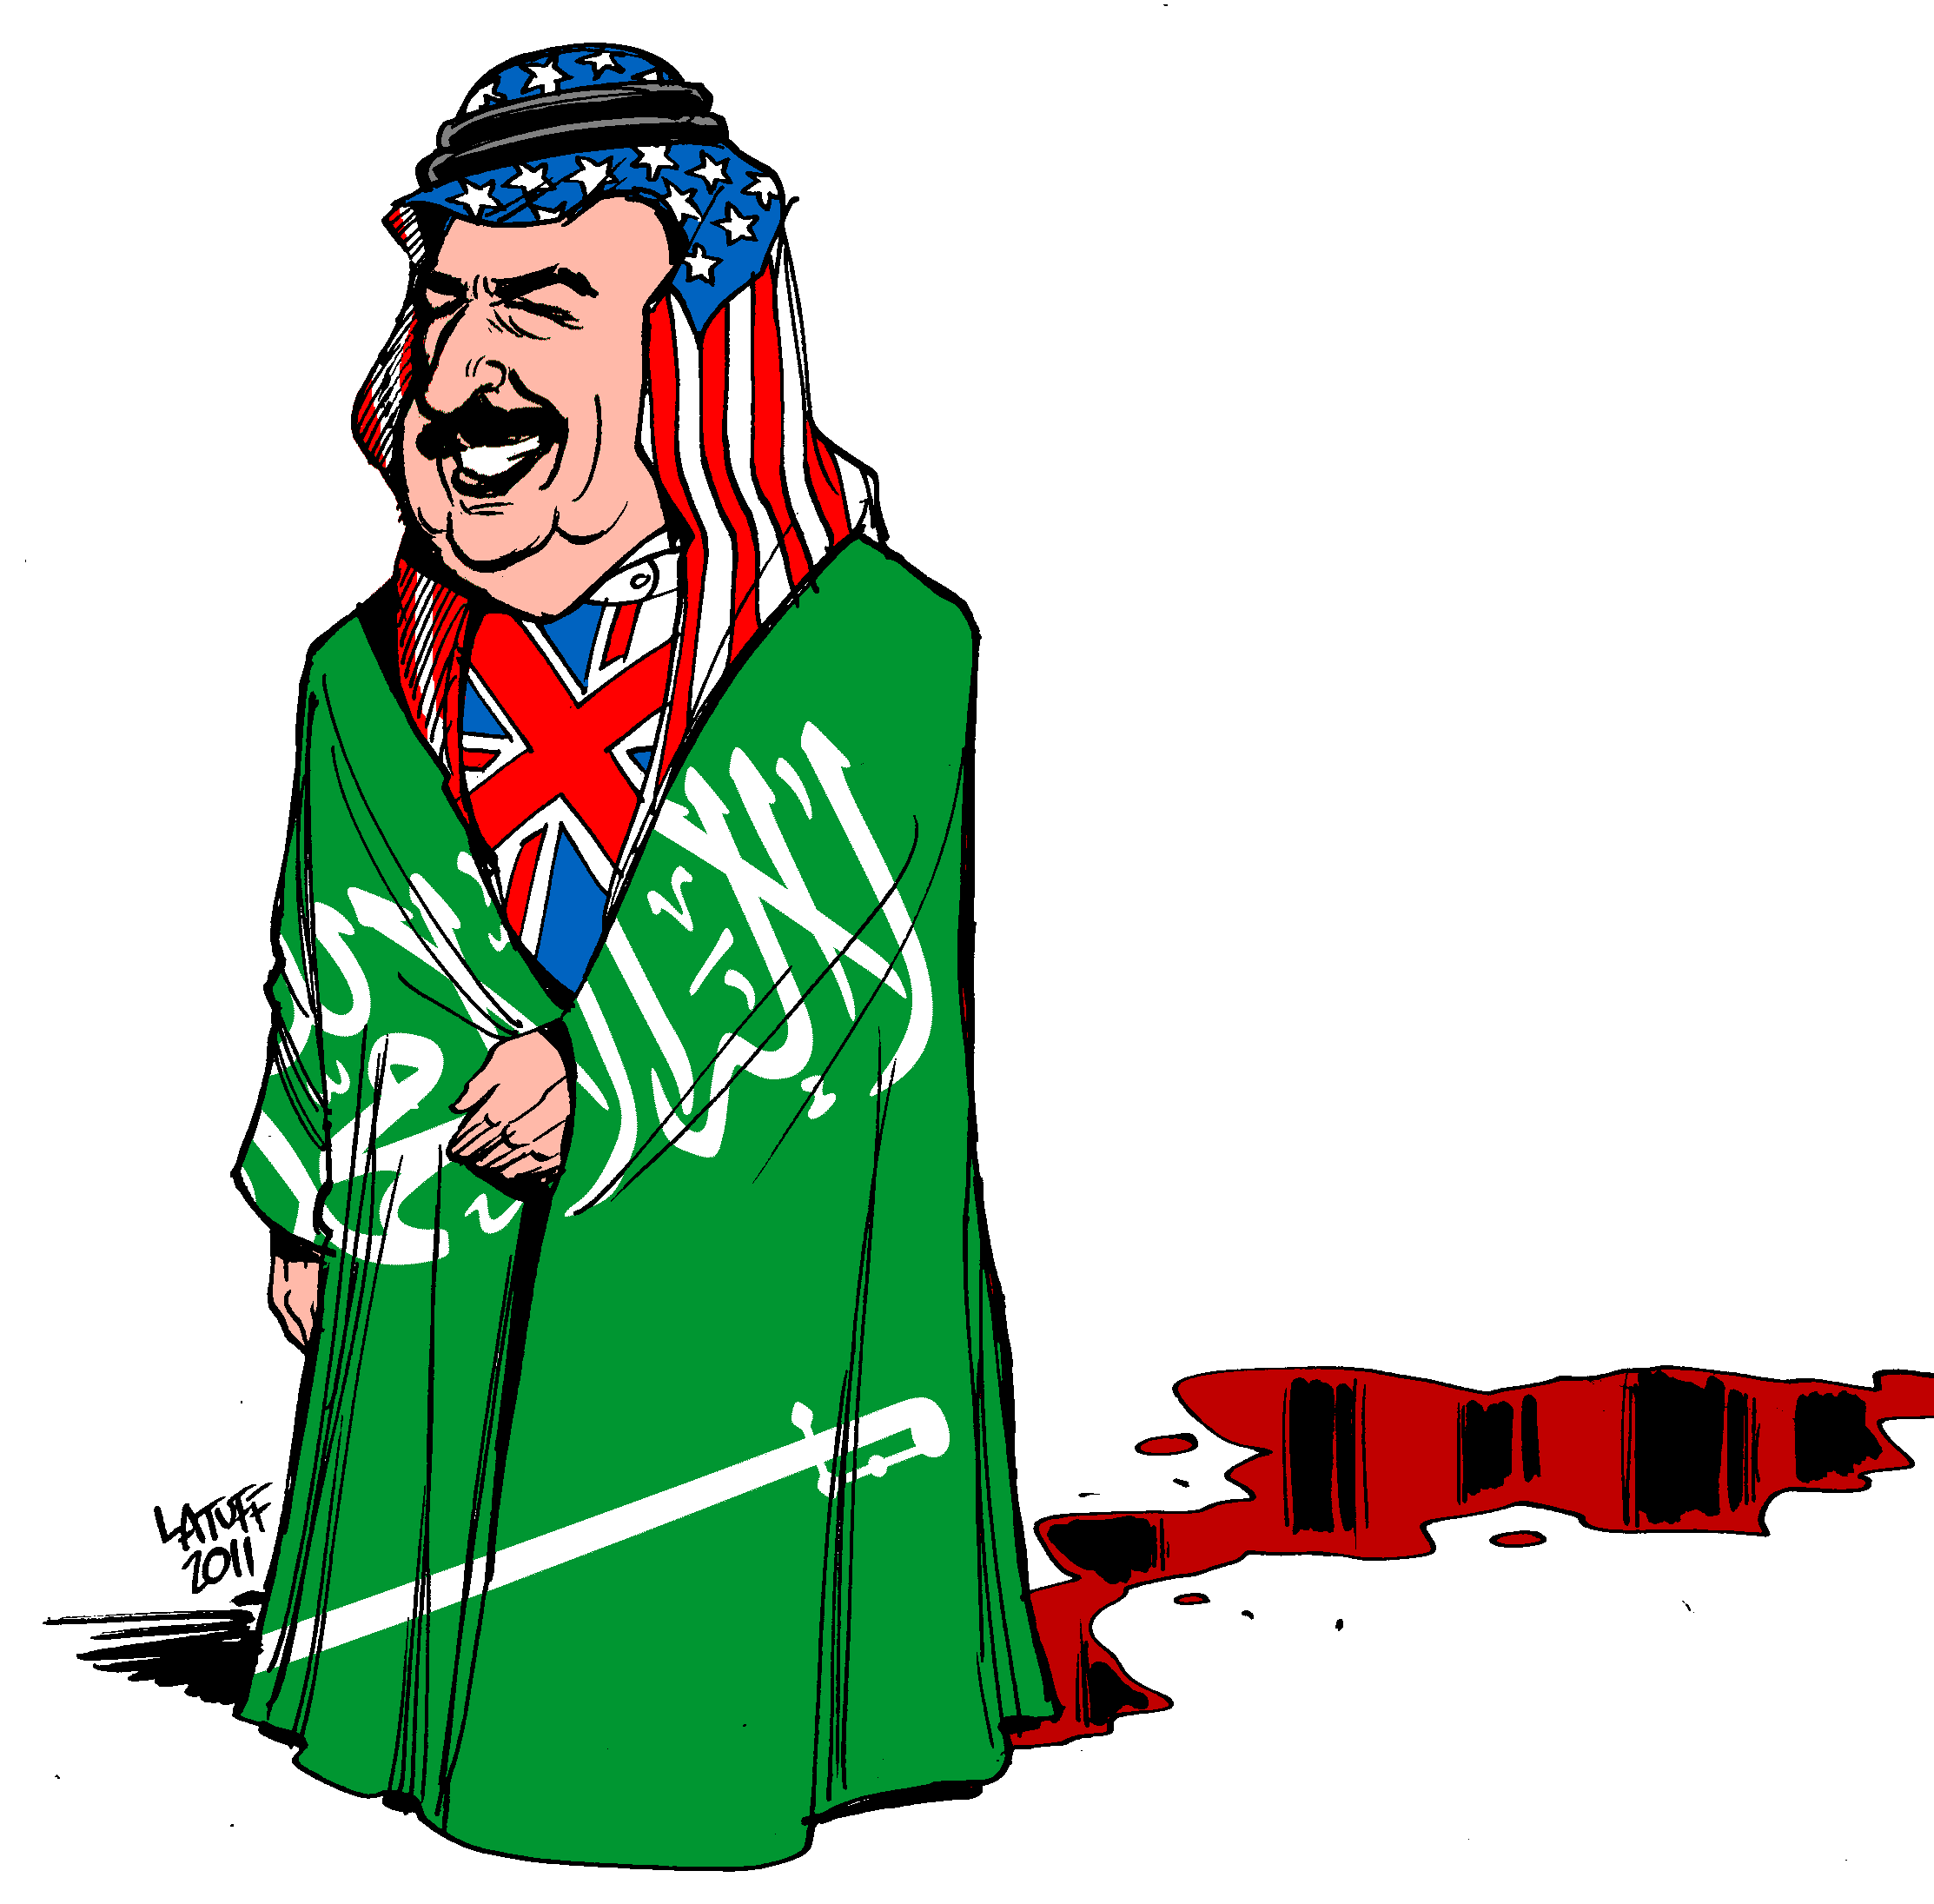 The King of Bahrain's Clothes